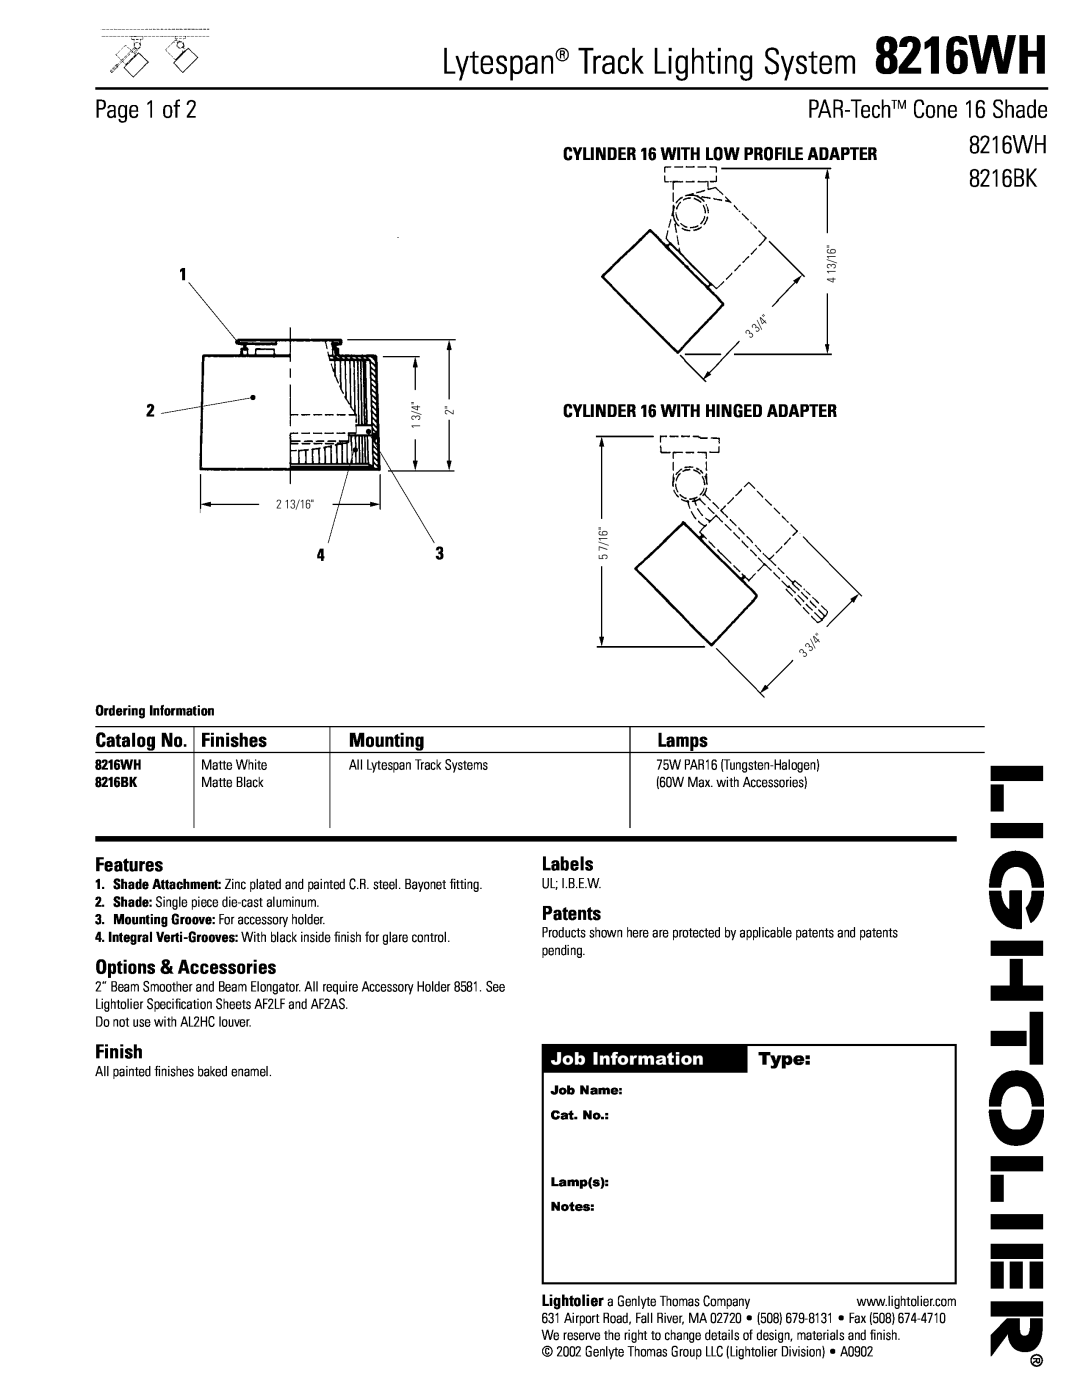 Lightolier specifications Lytespan Track Lighting System 8216WH, Page 1 of, PAR-TechTM Cone 16 Shade, Finishes, Lamps 